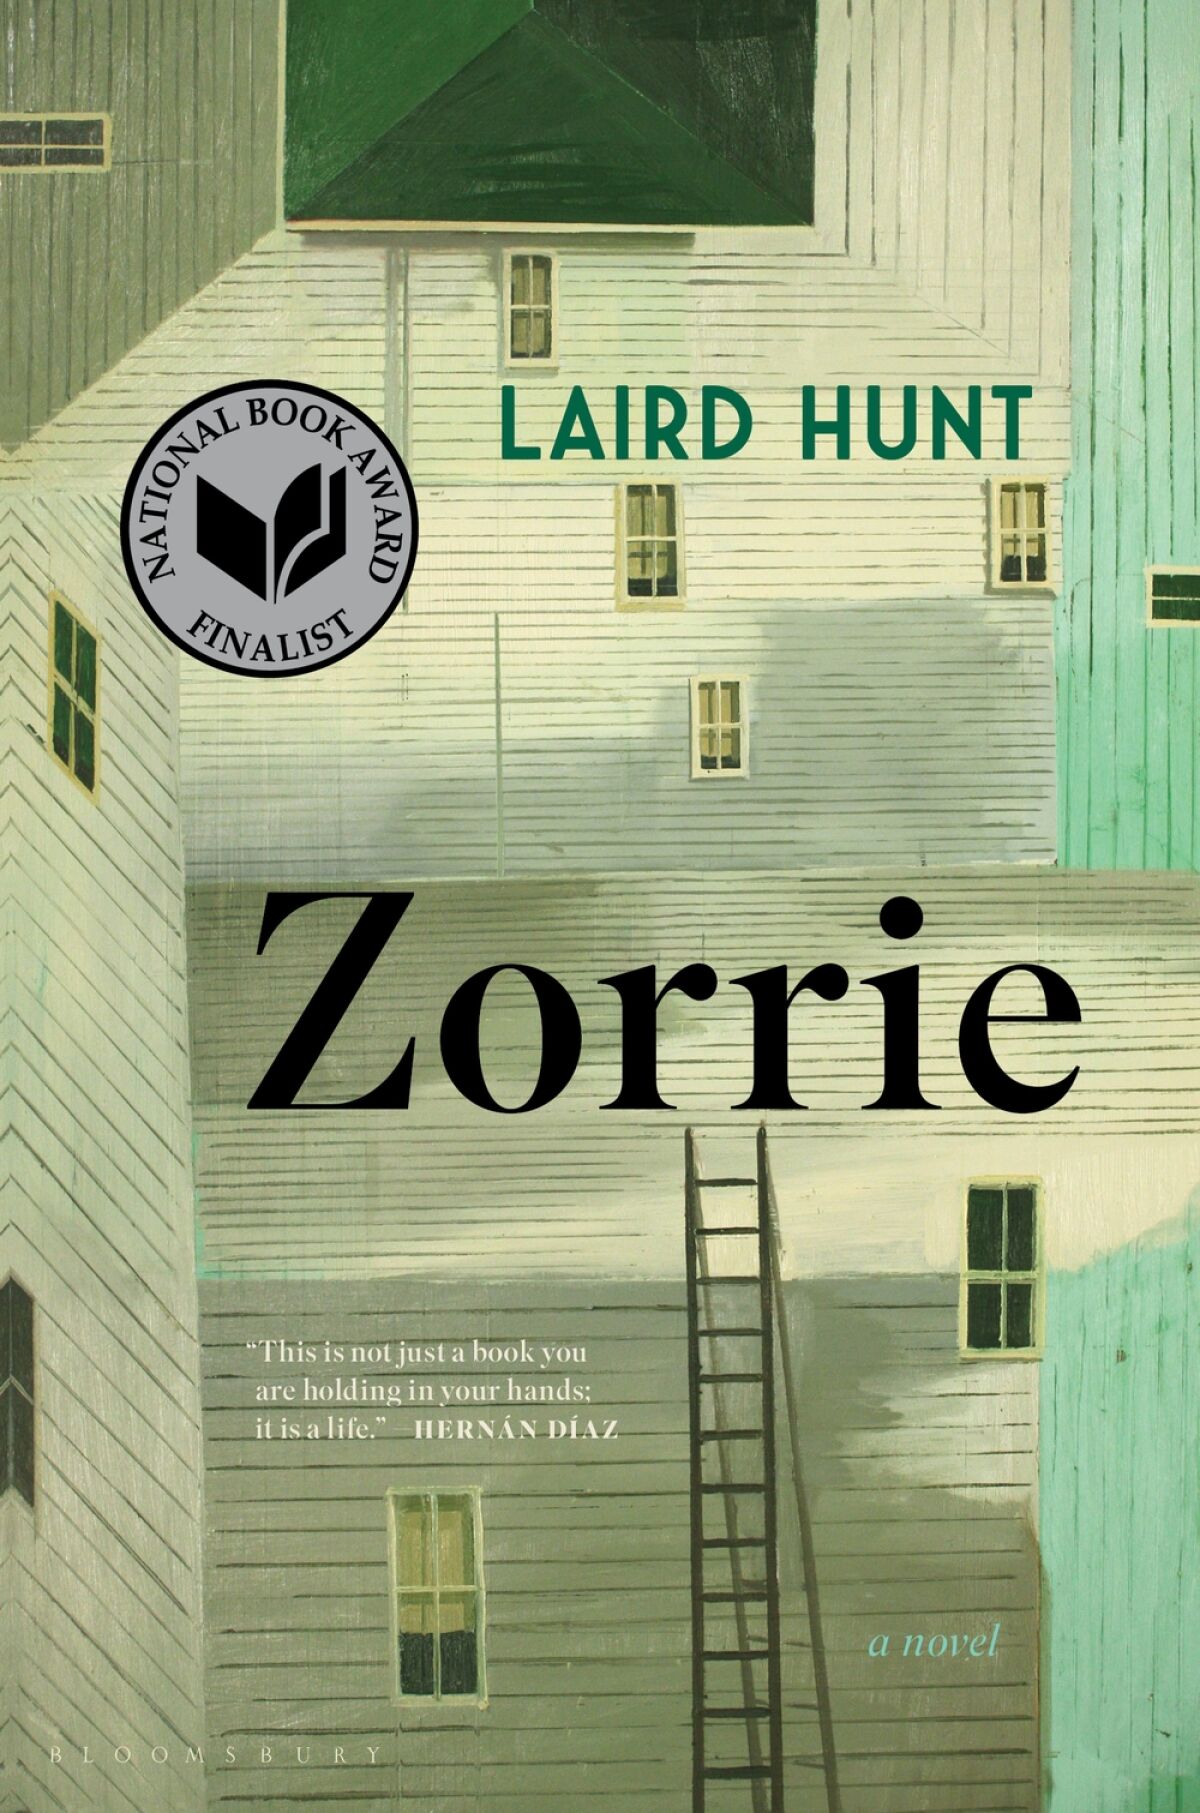 "Zorrie," by Laird Hunt